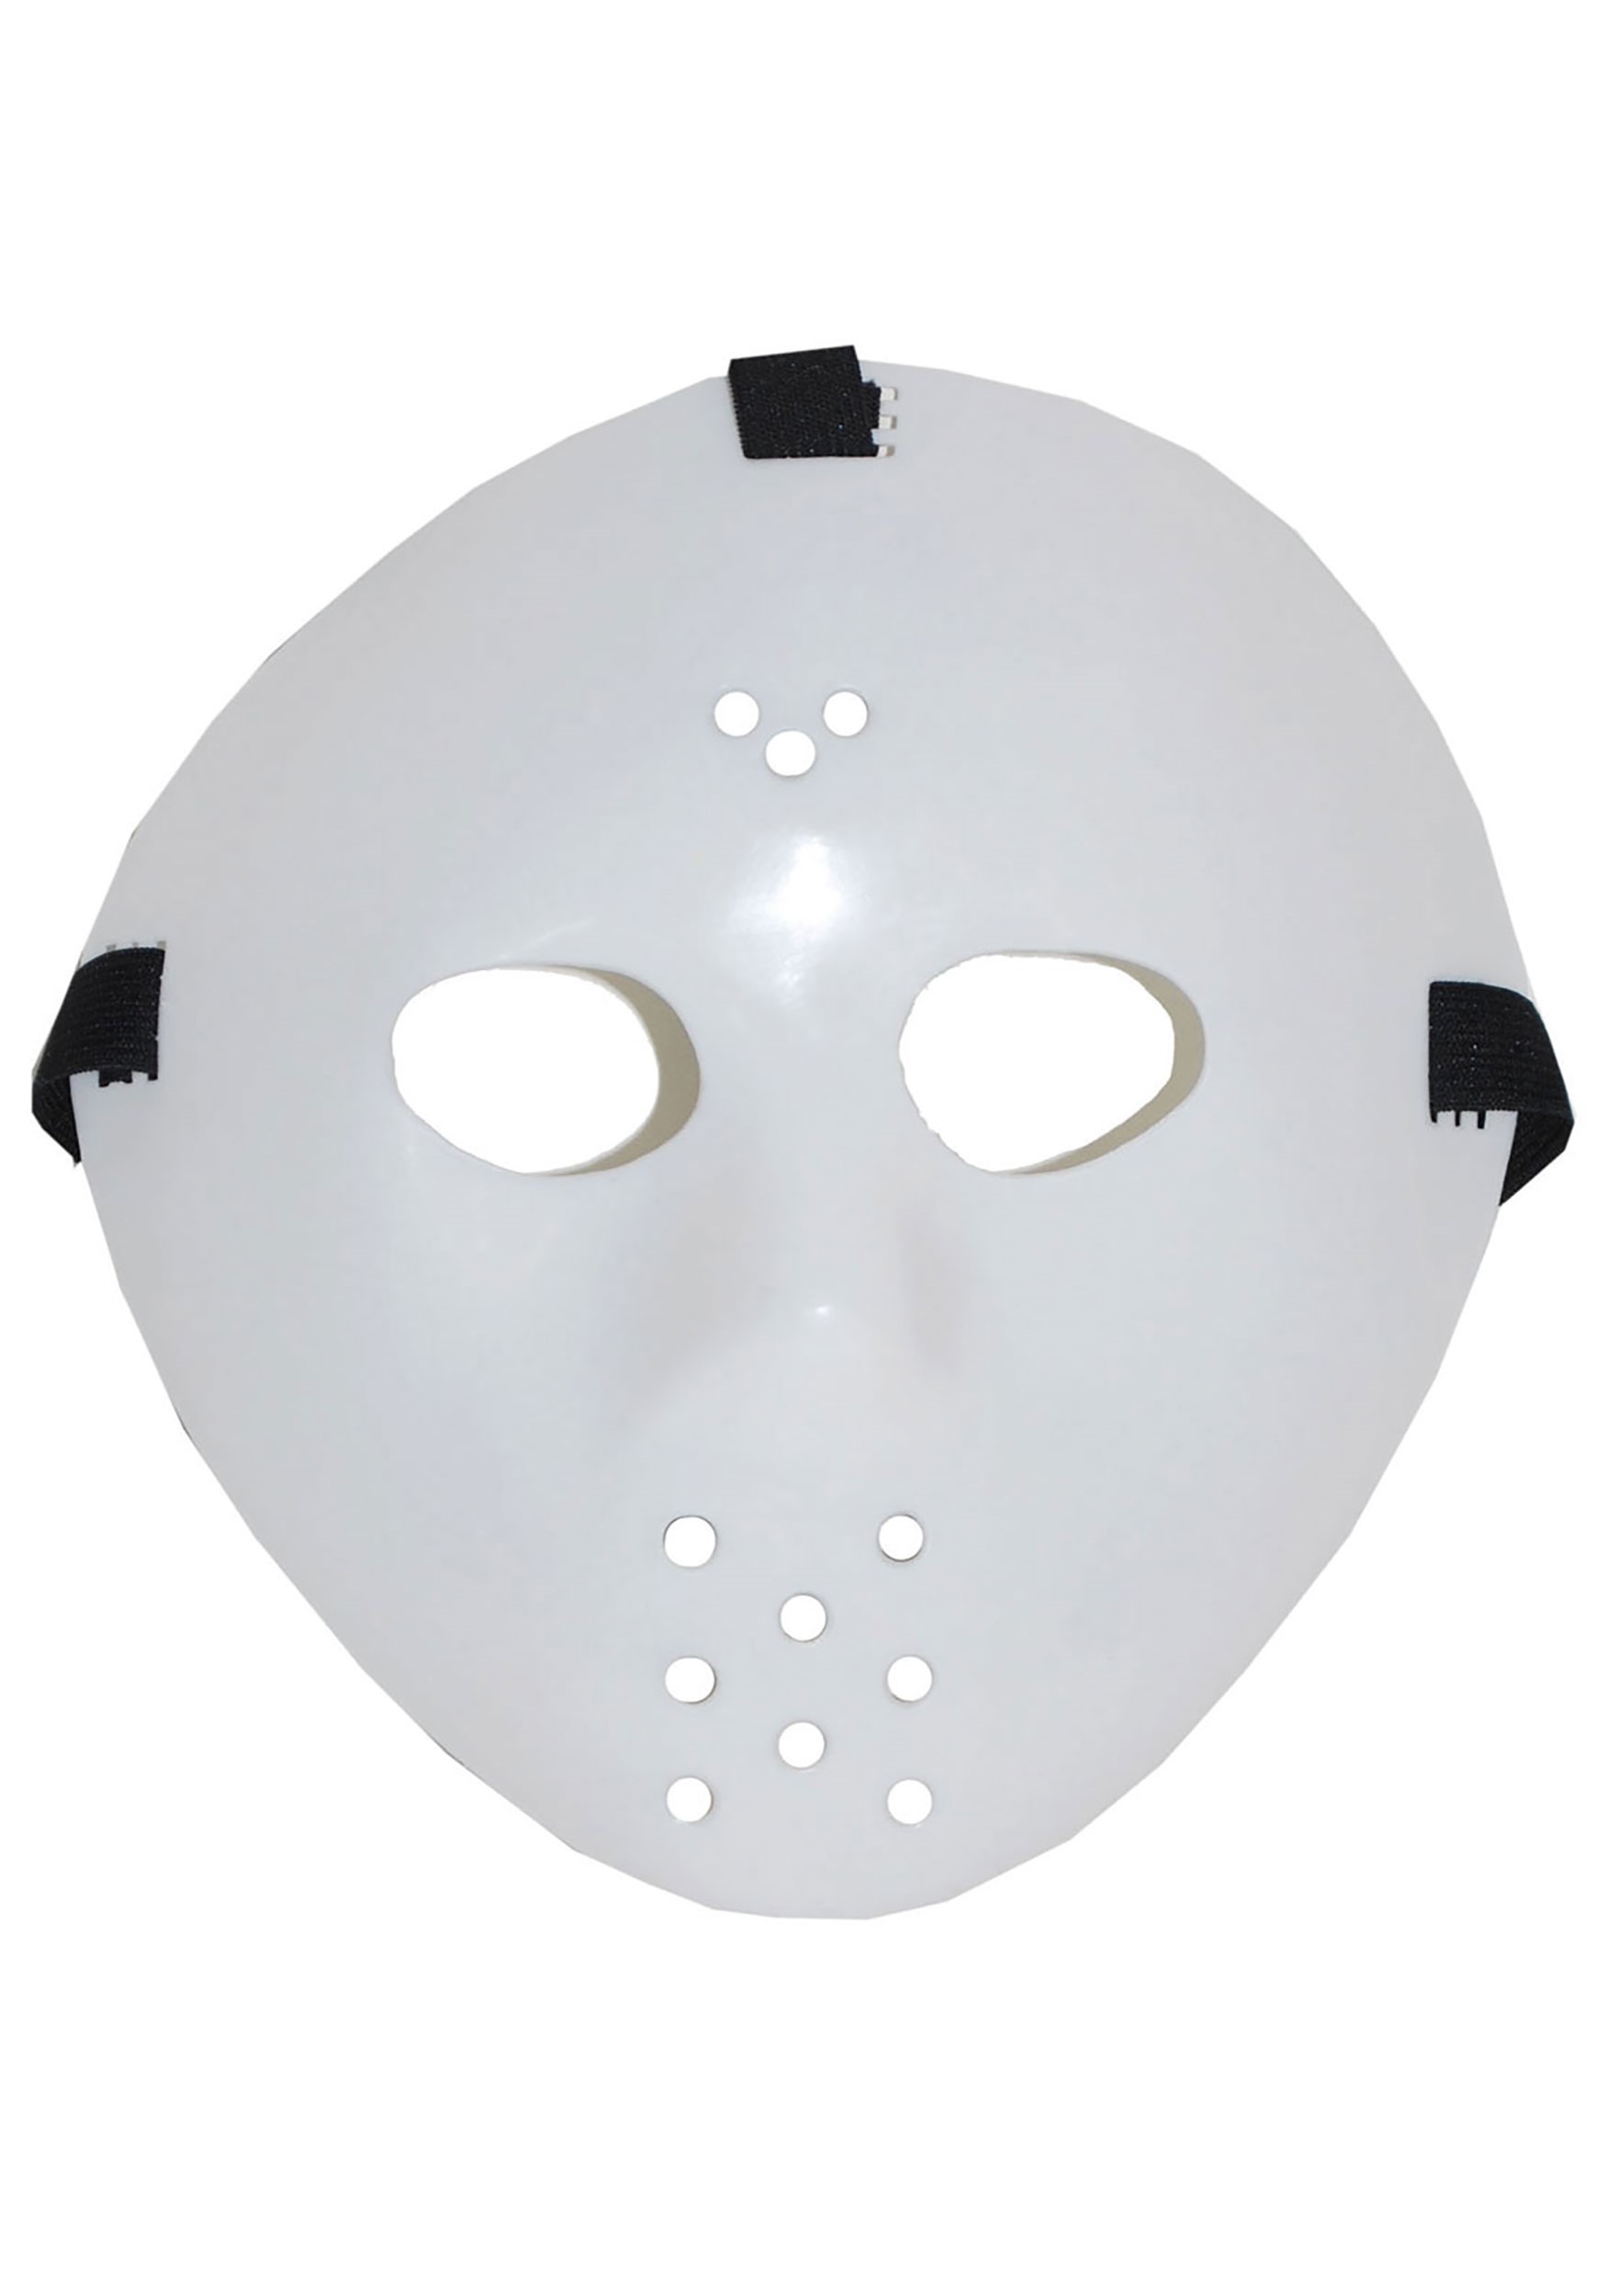 Brød Armstrong udkast Glow in the Dark Friday the 13th Jason Voorhees Mask